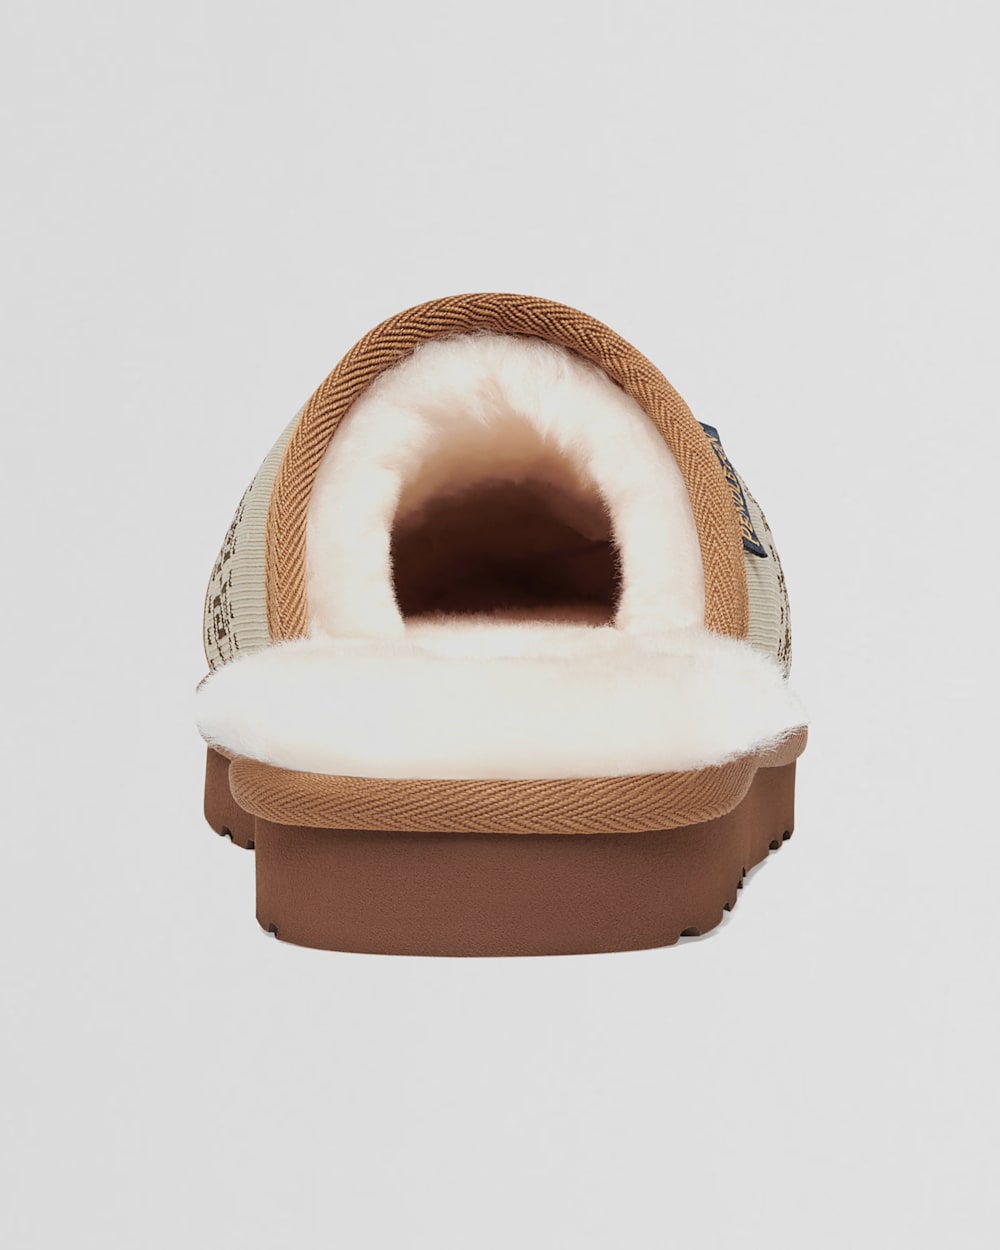 ALTERNATE VIEW OF MEN'S SLIDE SLIPPERS IN THE DUDE image number 4